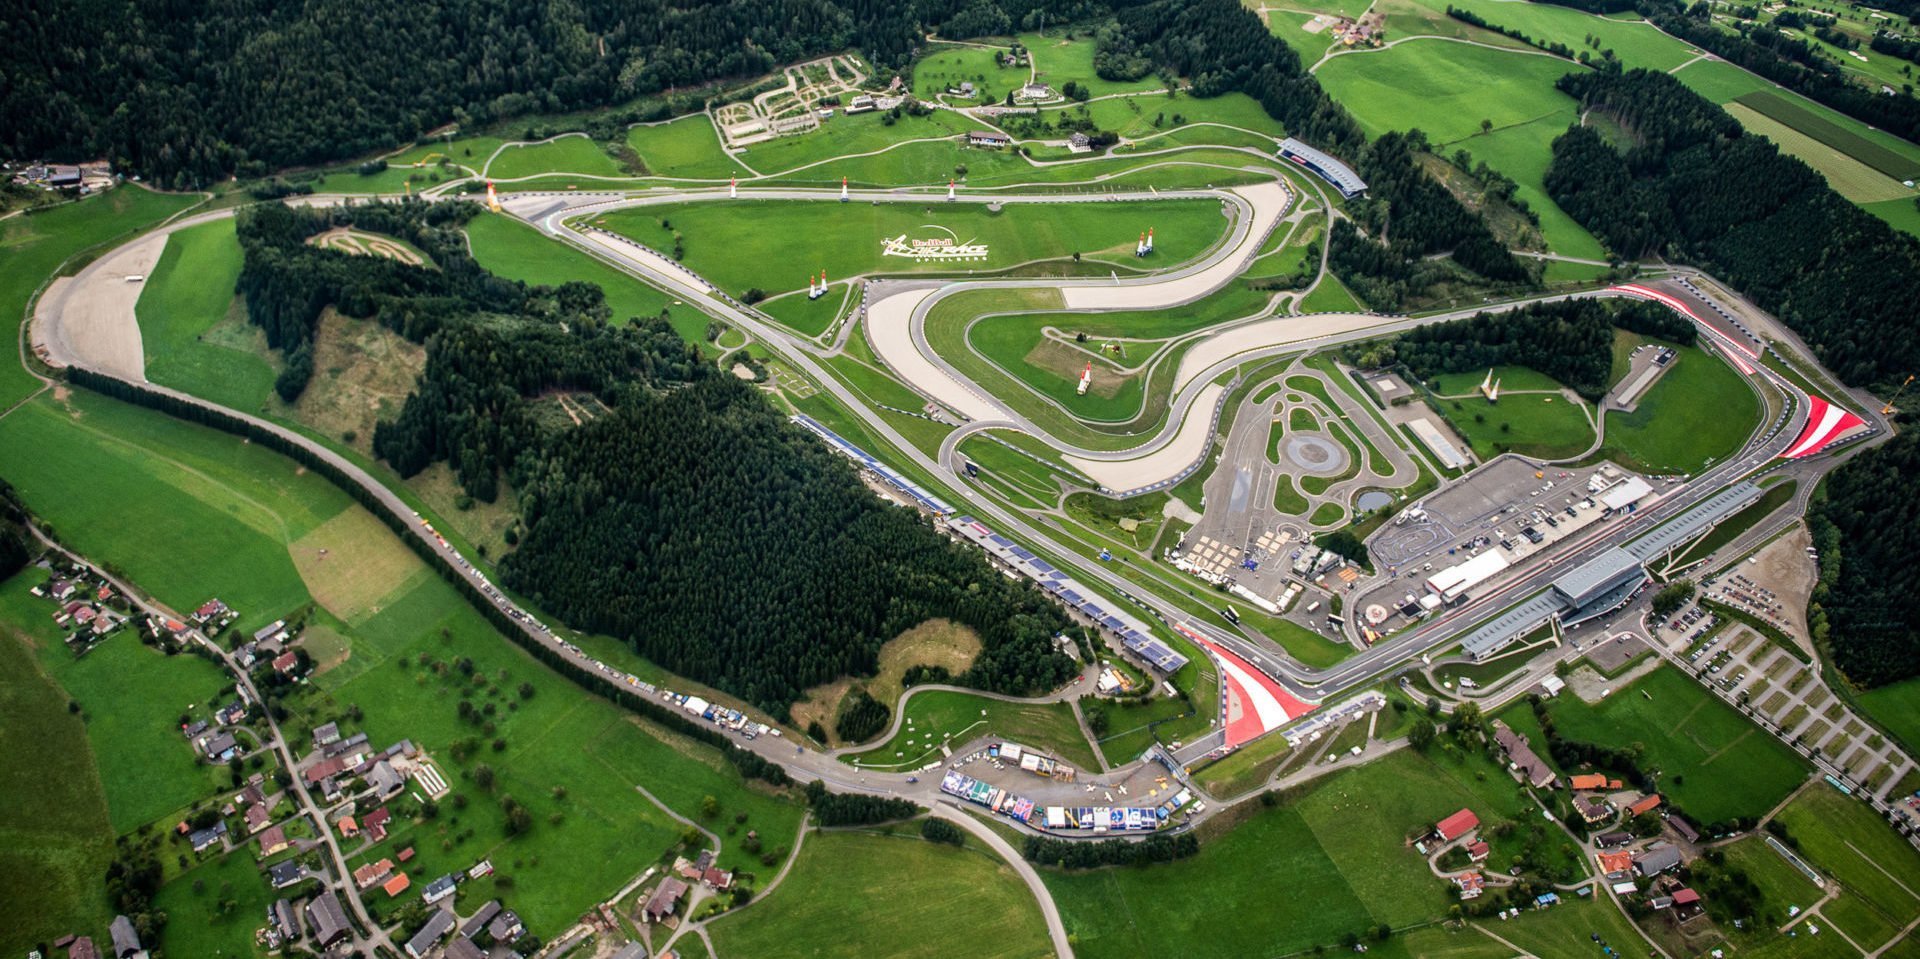 An aerial view of the Red Bull Ring in Spielberg